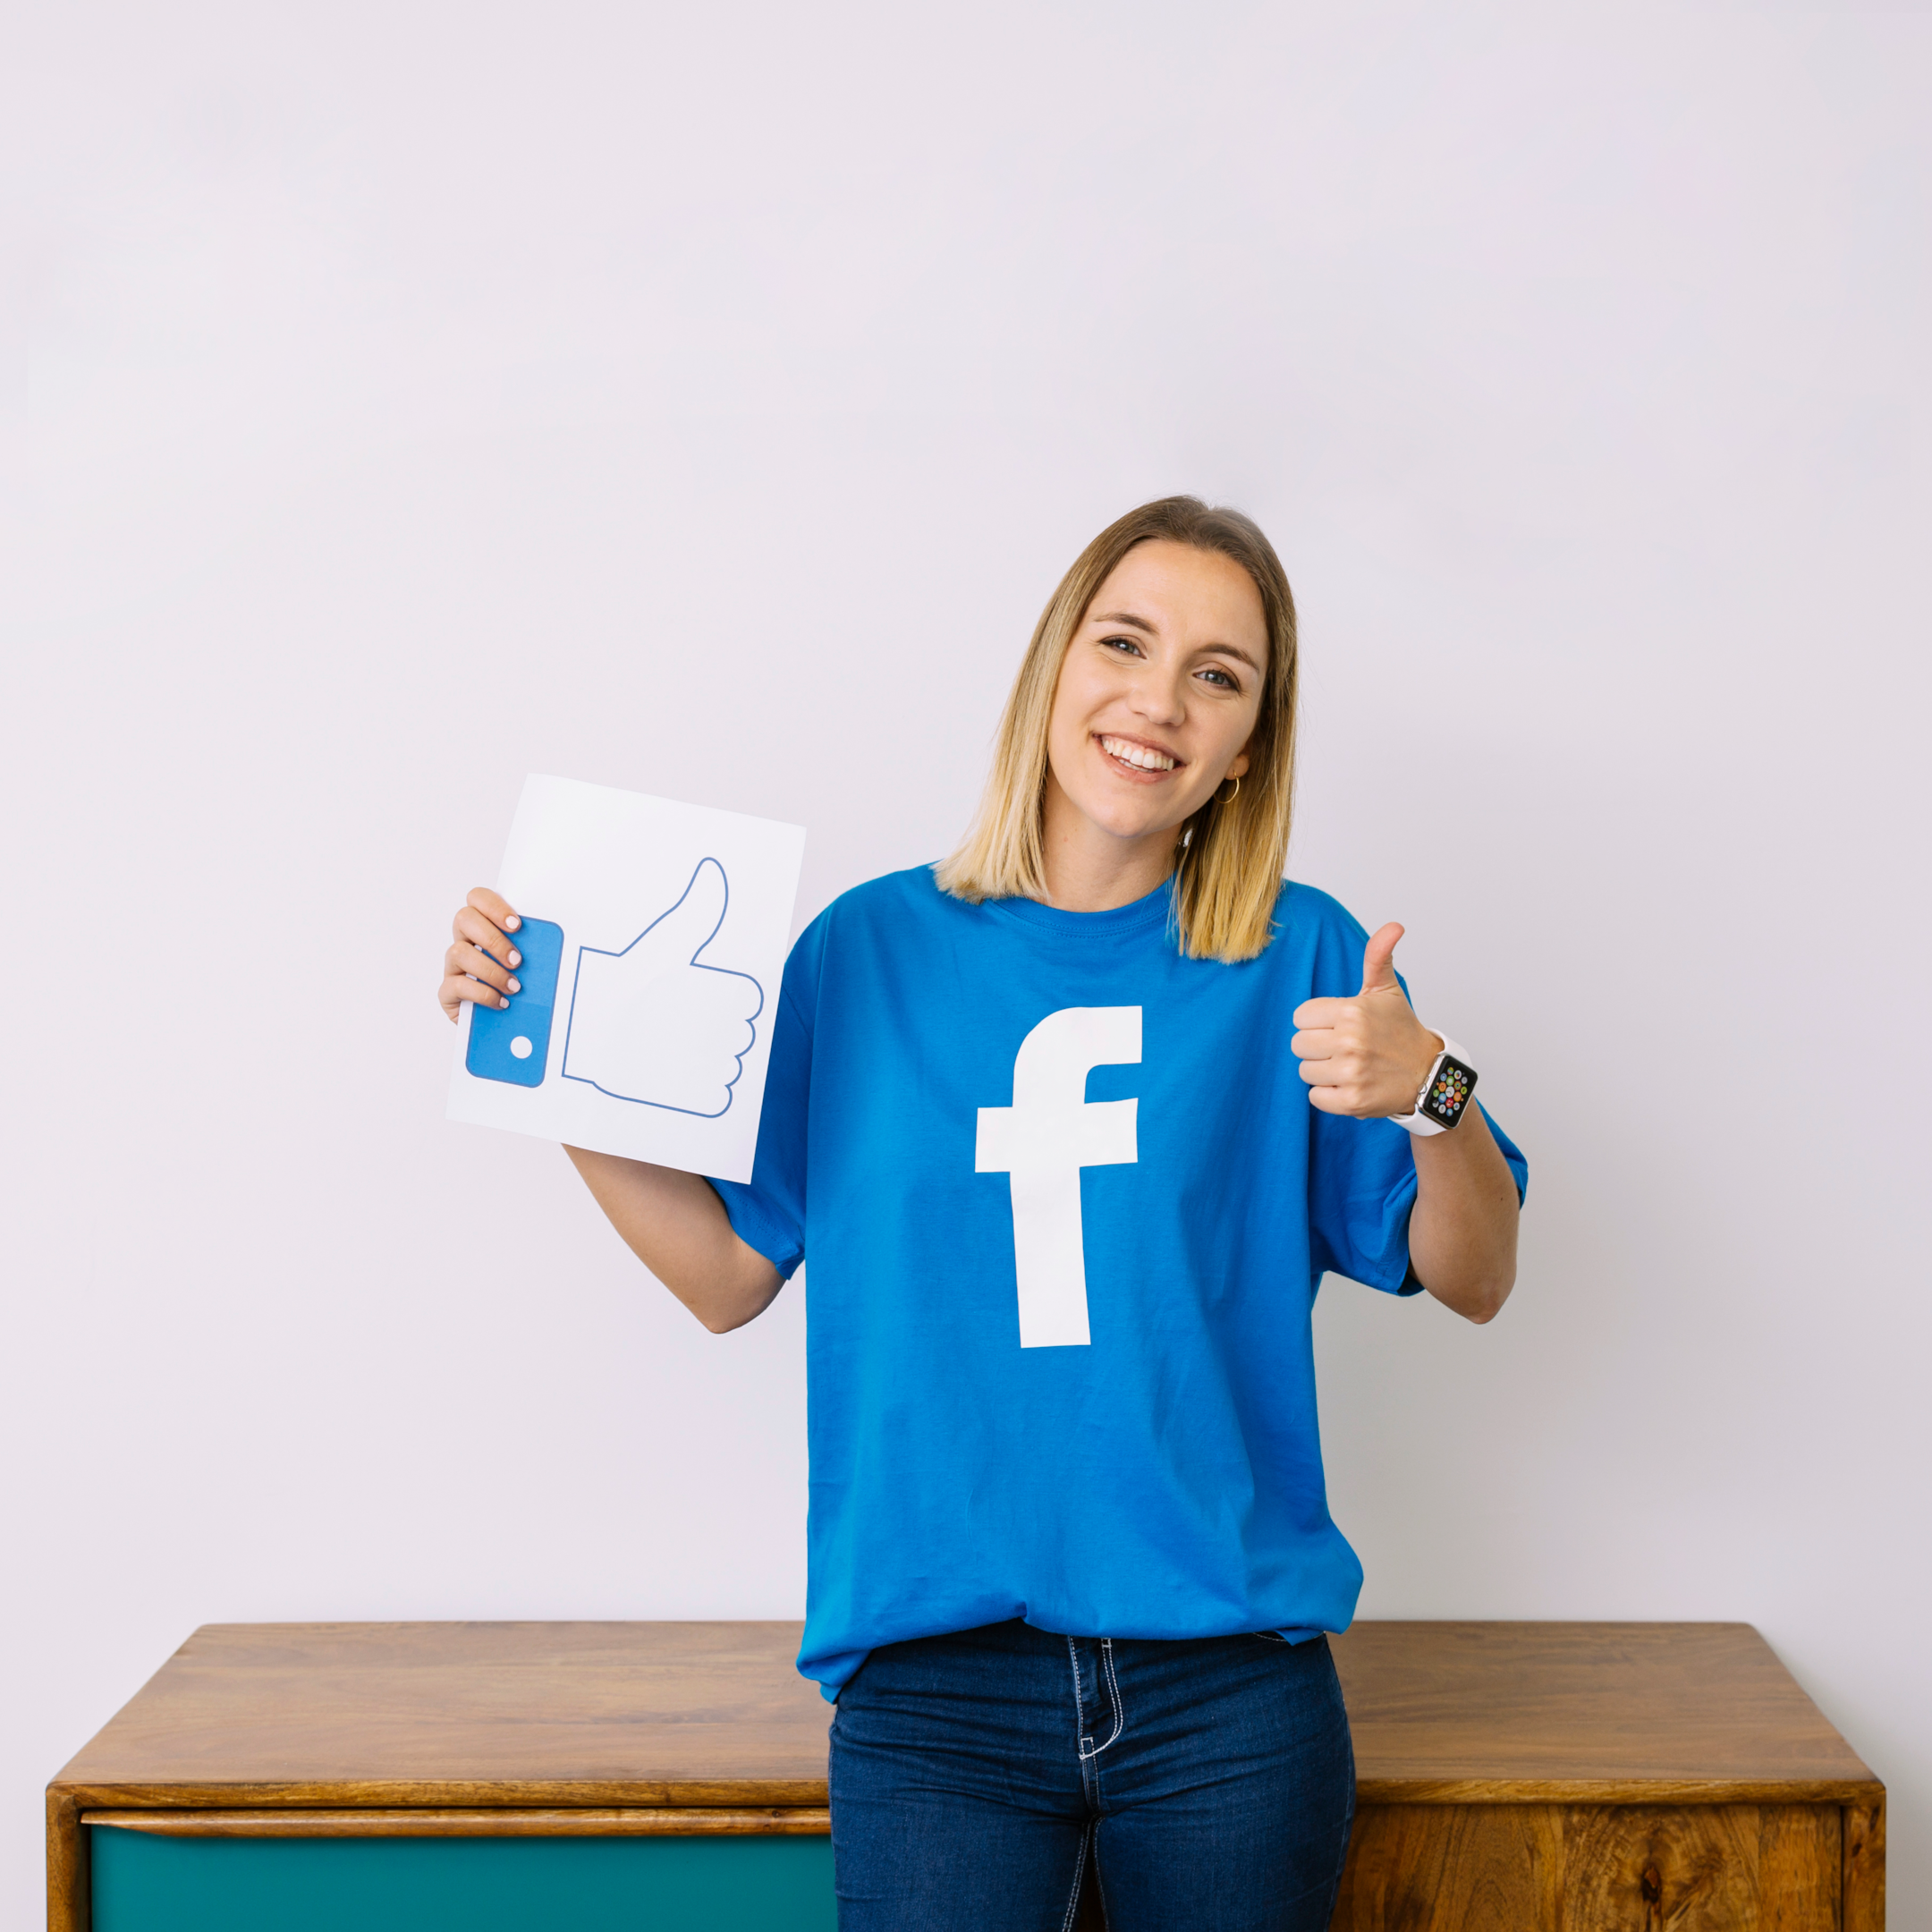 Facebook ad expert giving thumbs up